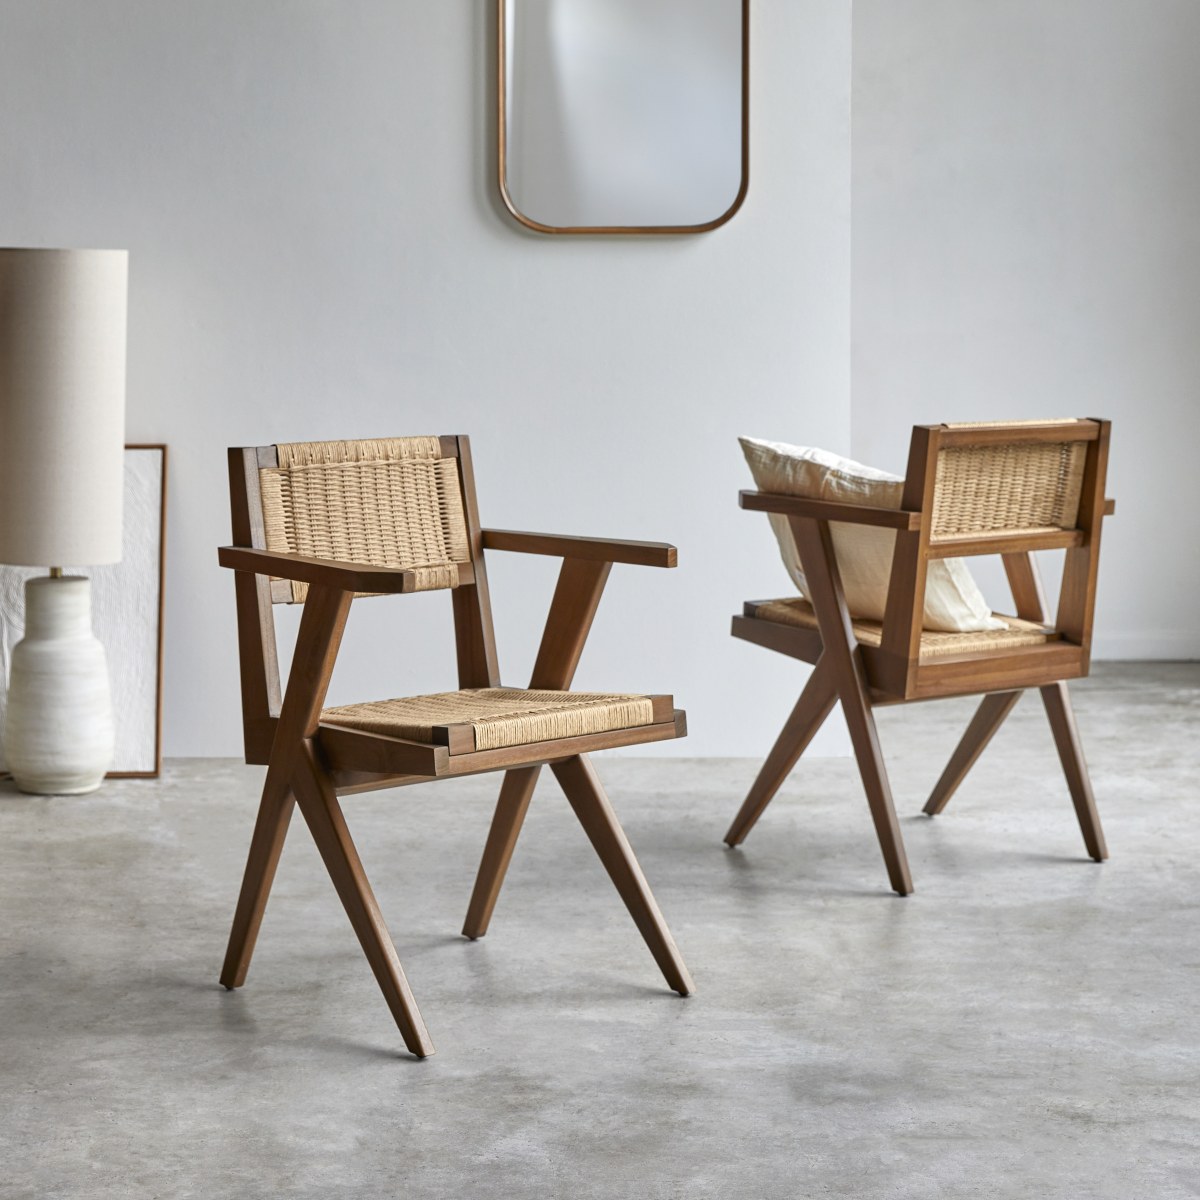 Tribute - ﻿Solid teak and woven chair